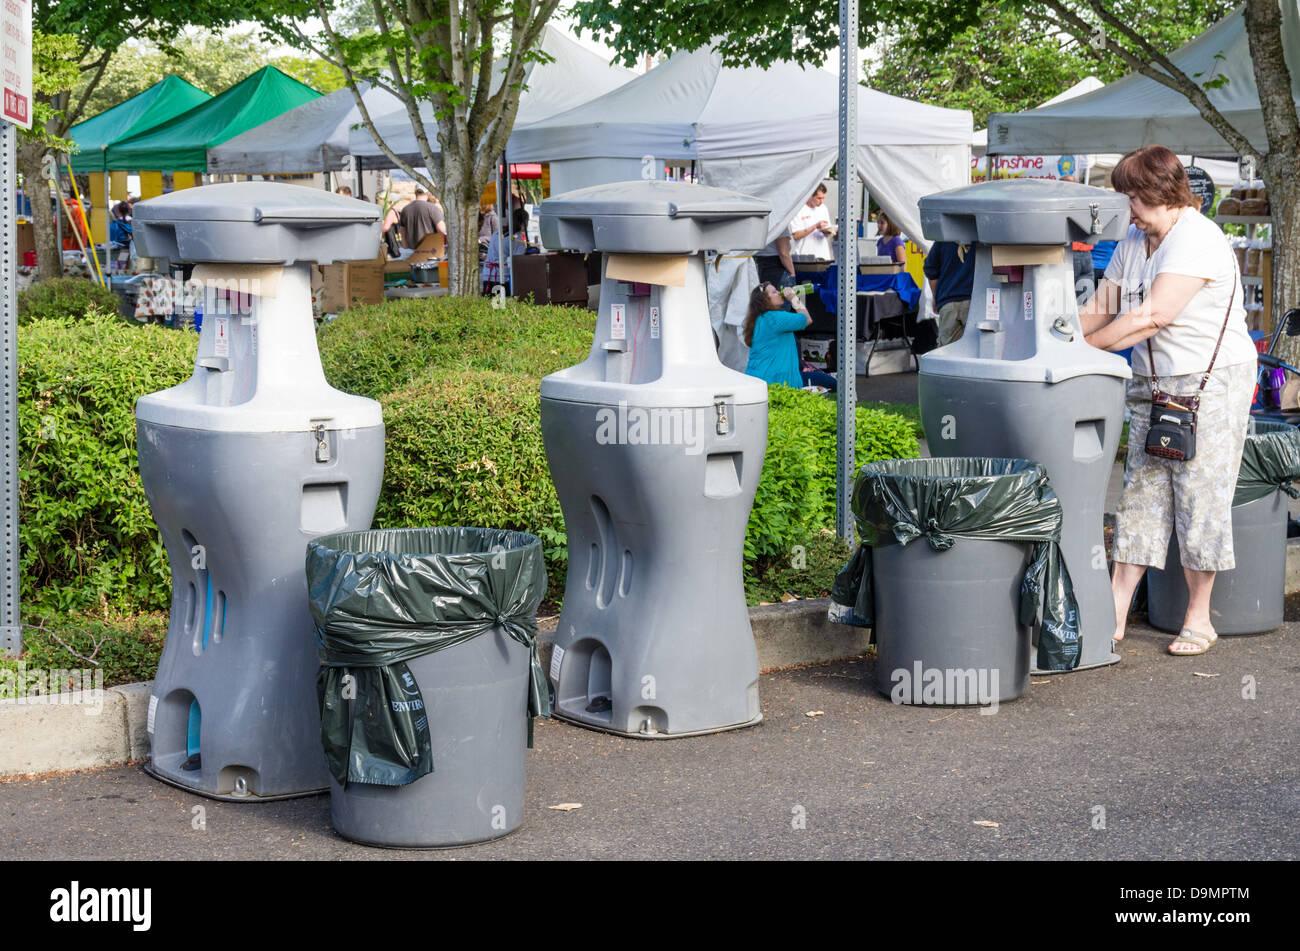 Beaverton Oregon United States.  Hand wash stations allow customers to wash up while at the market Stock Photo